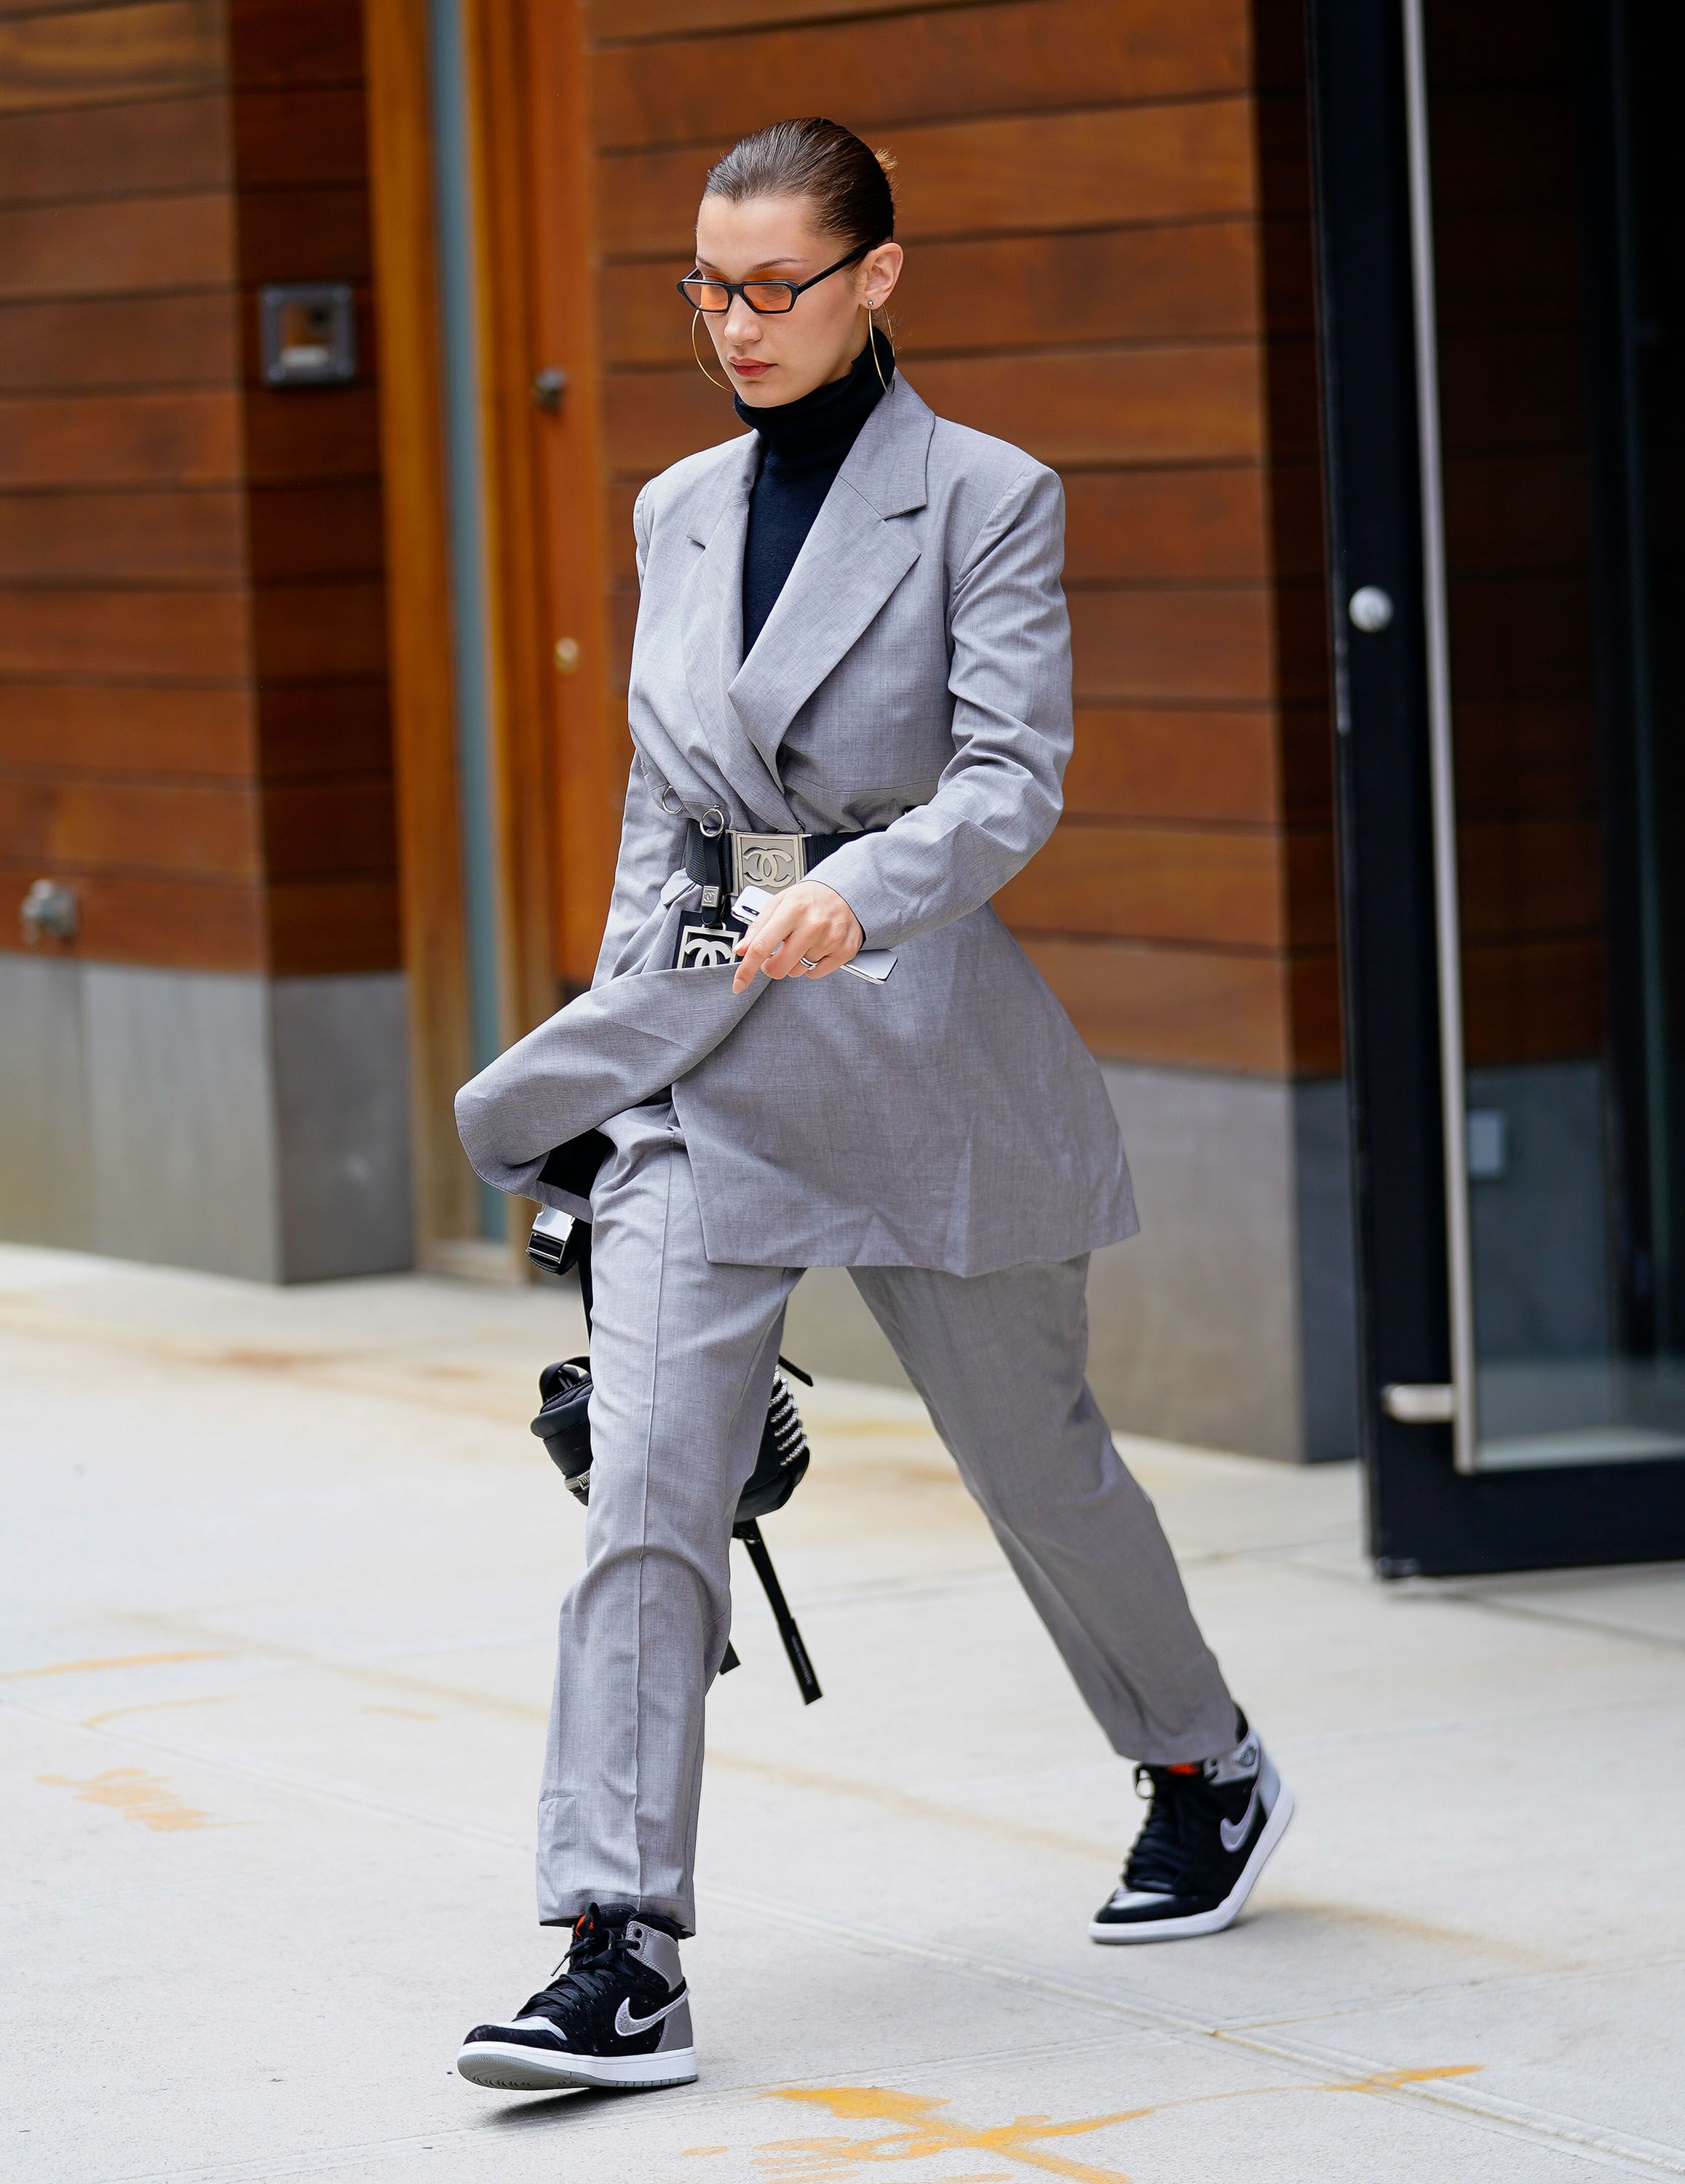 How to Wear Suits With Sneakers